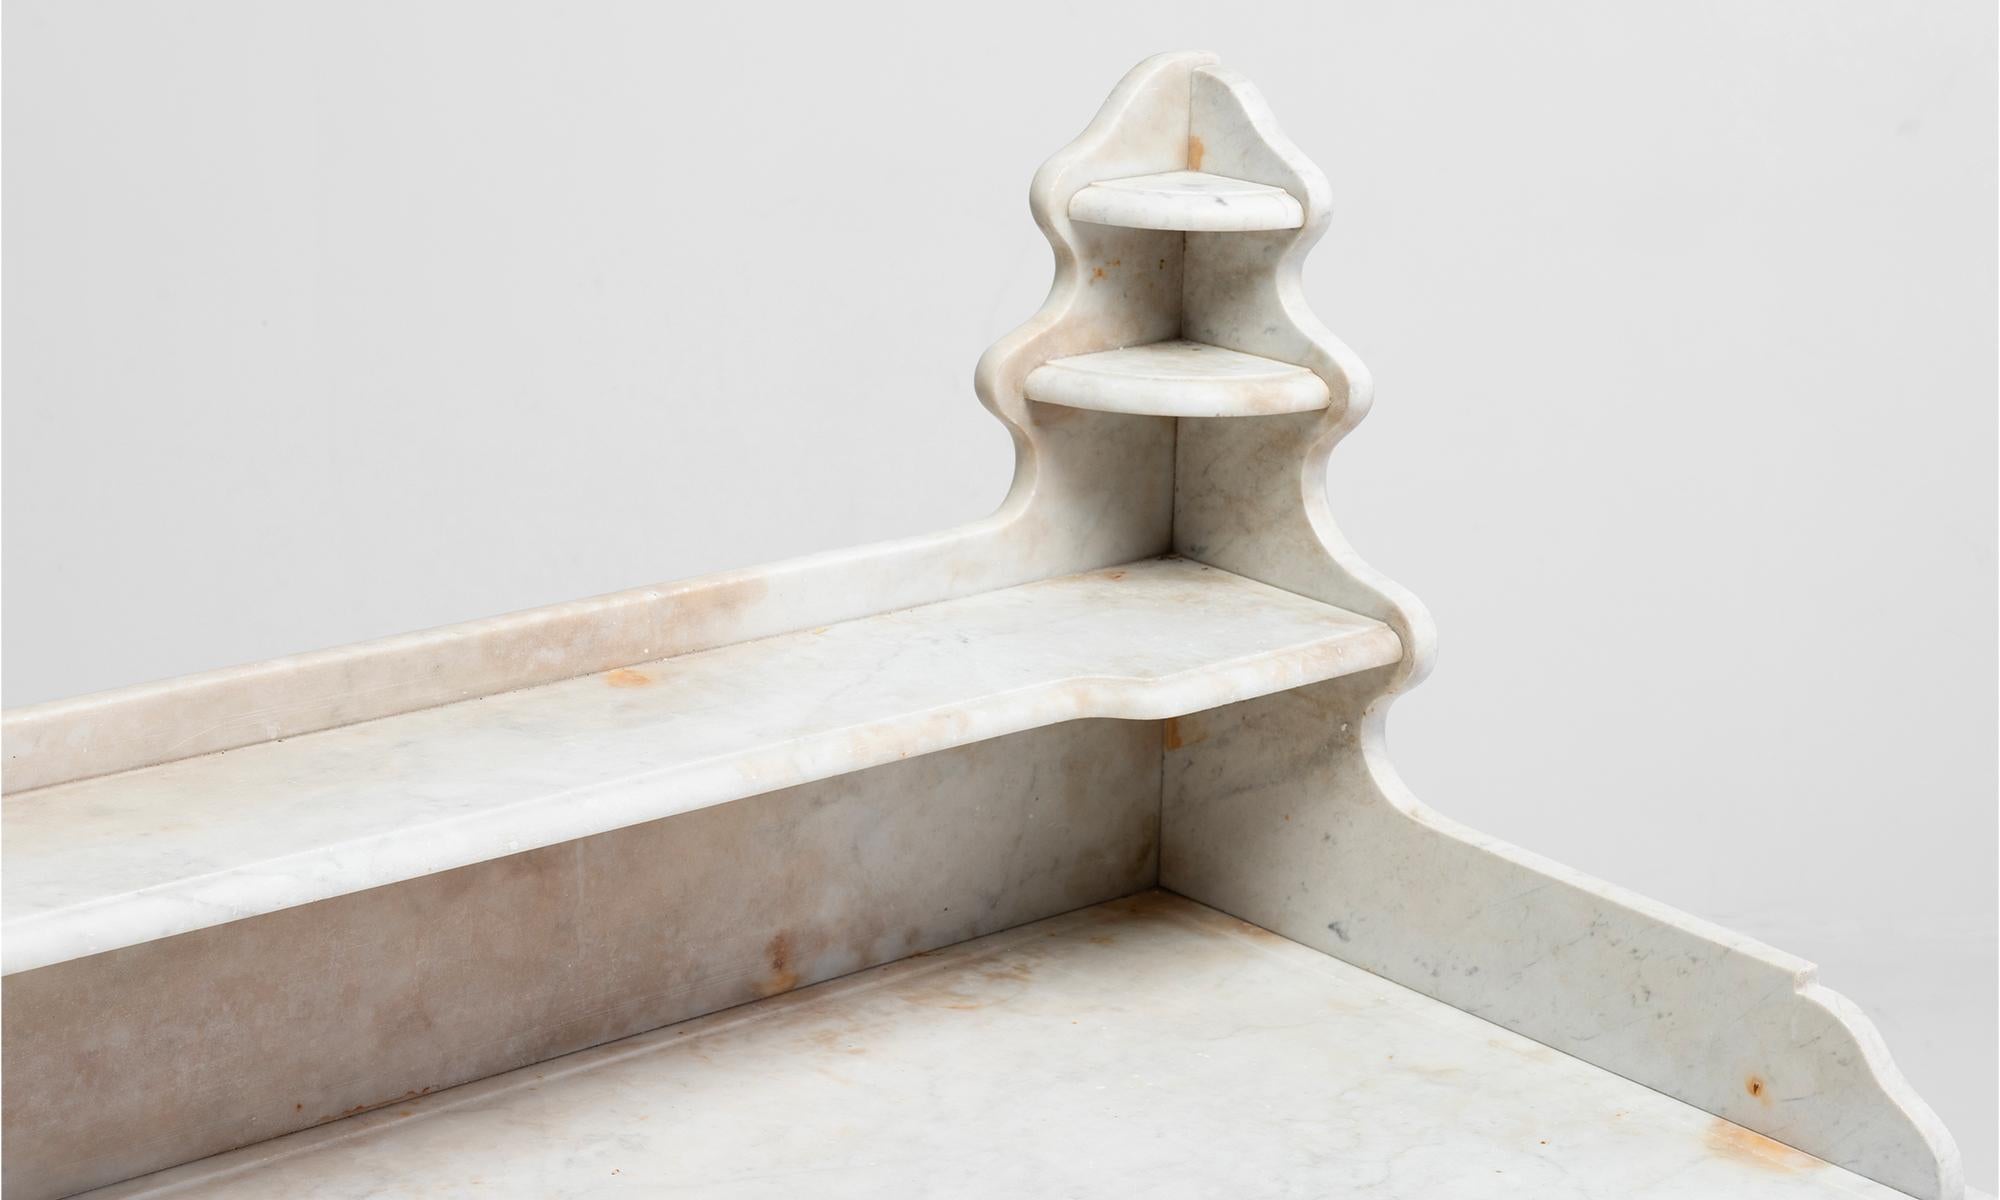 Marble pastry table, France, circa 1880.

Bleached oak with ornate iron hardware. White marble surface and shelving.